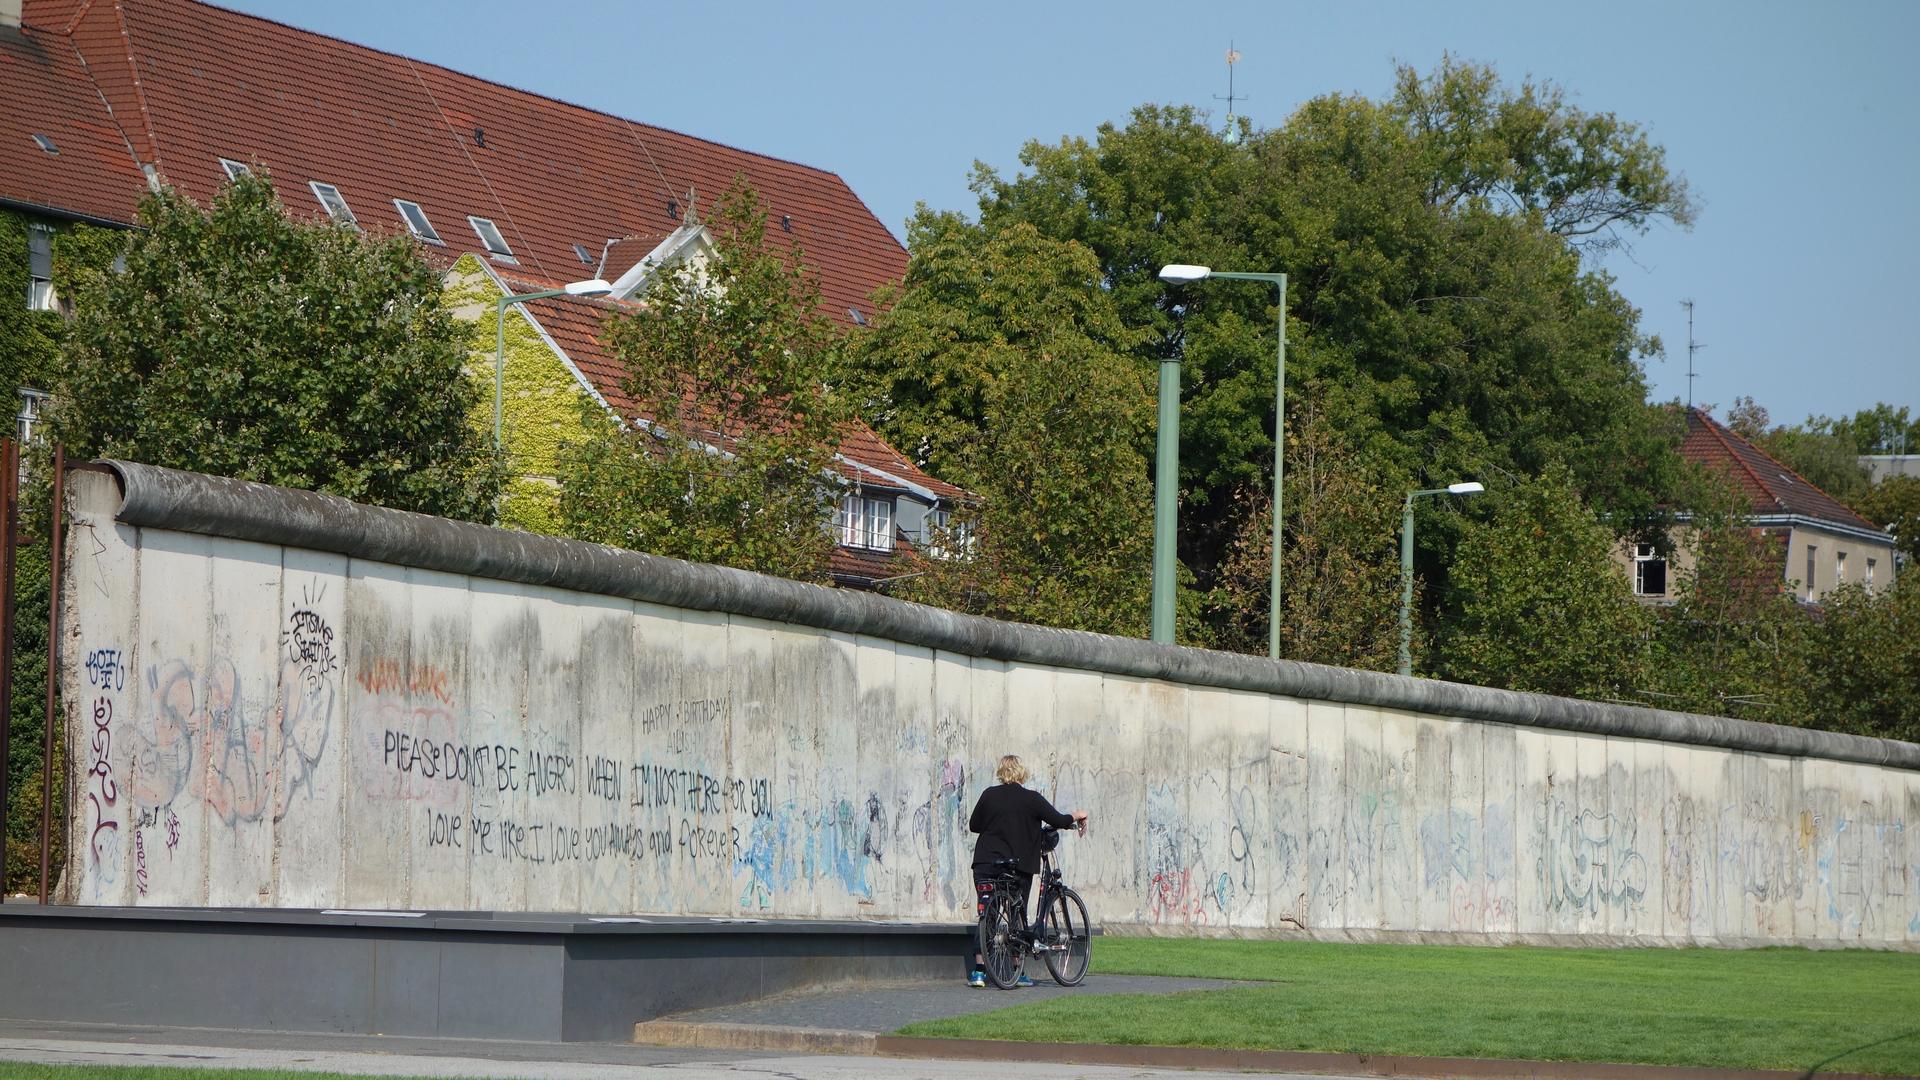 Berlin Wall remnant at Bernhardstrasse, where the wall once ran down the middle of a street